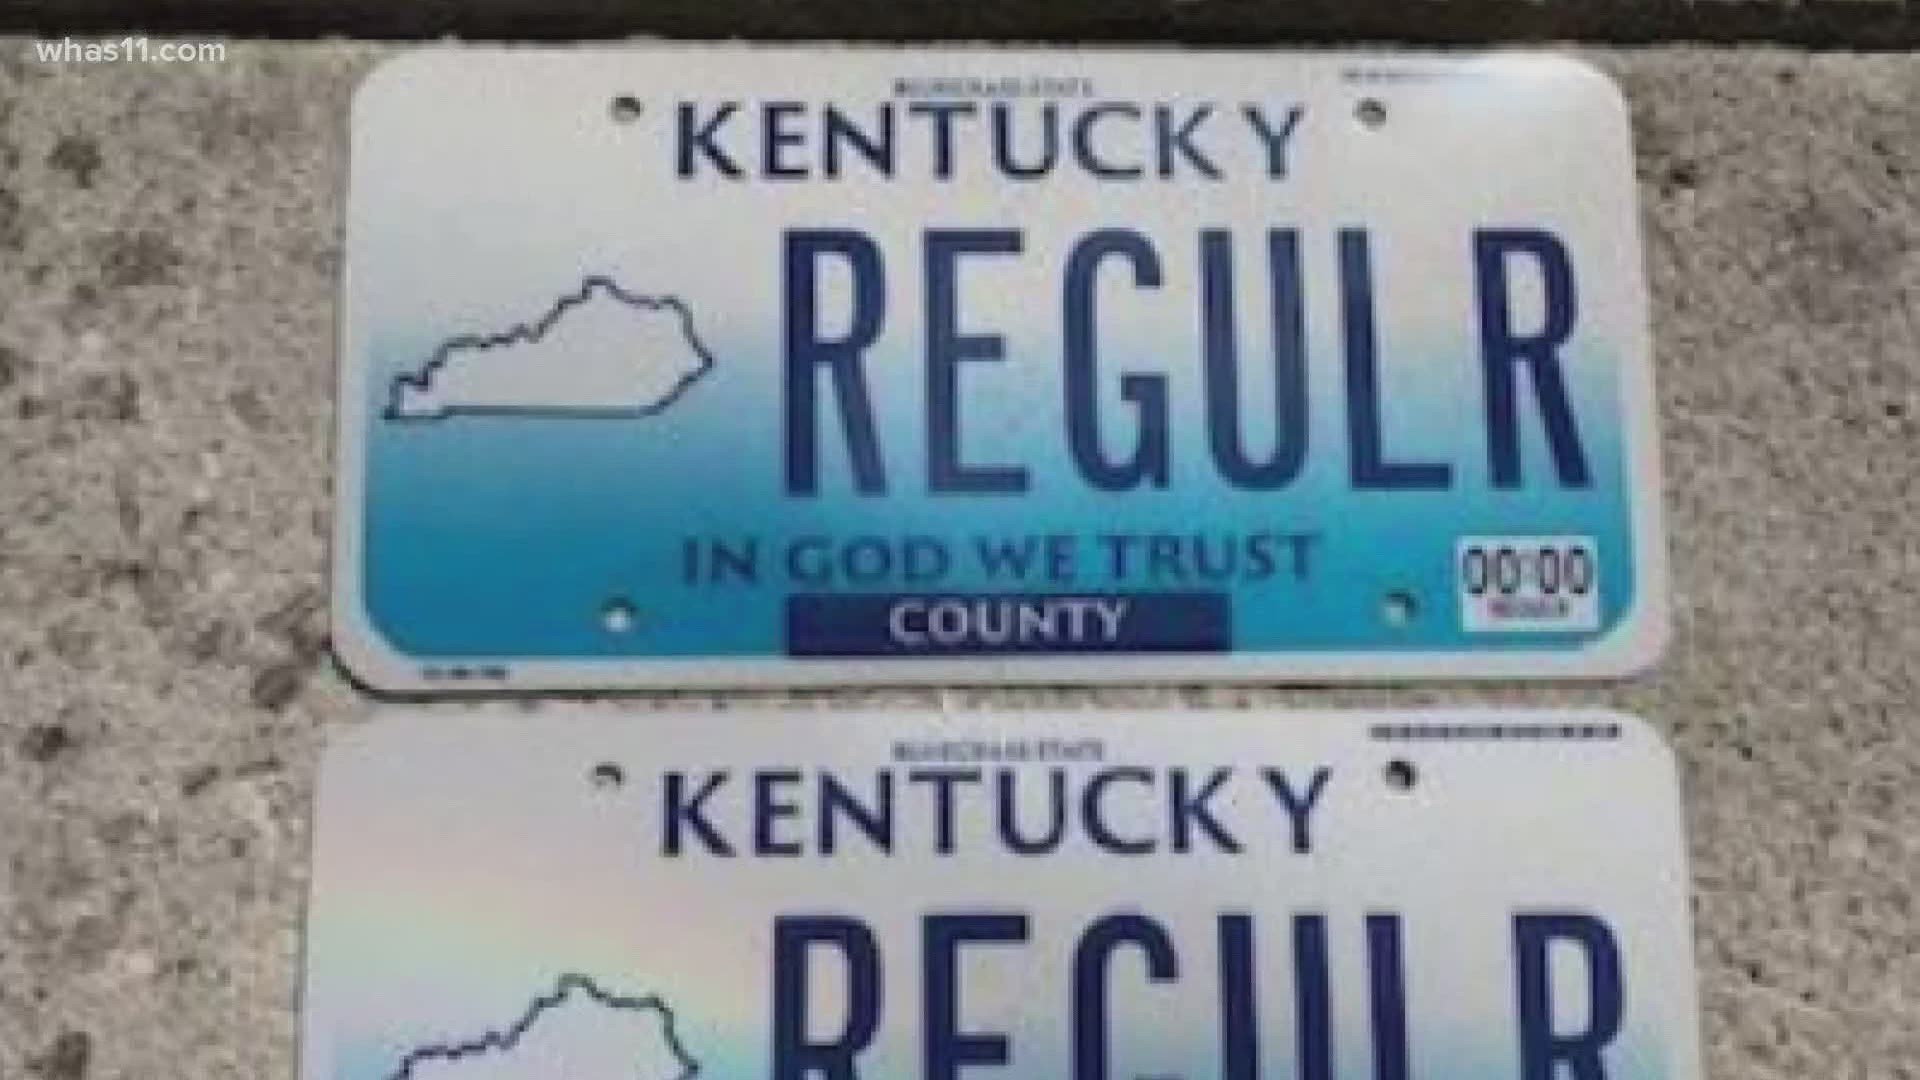 State transportation officials say the new plates are digitally printed on flat aluminum instead of traditional, embossed metal with raised letters and numbers.